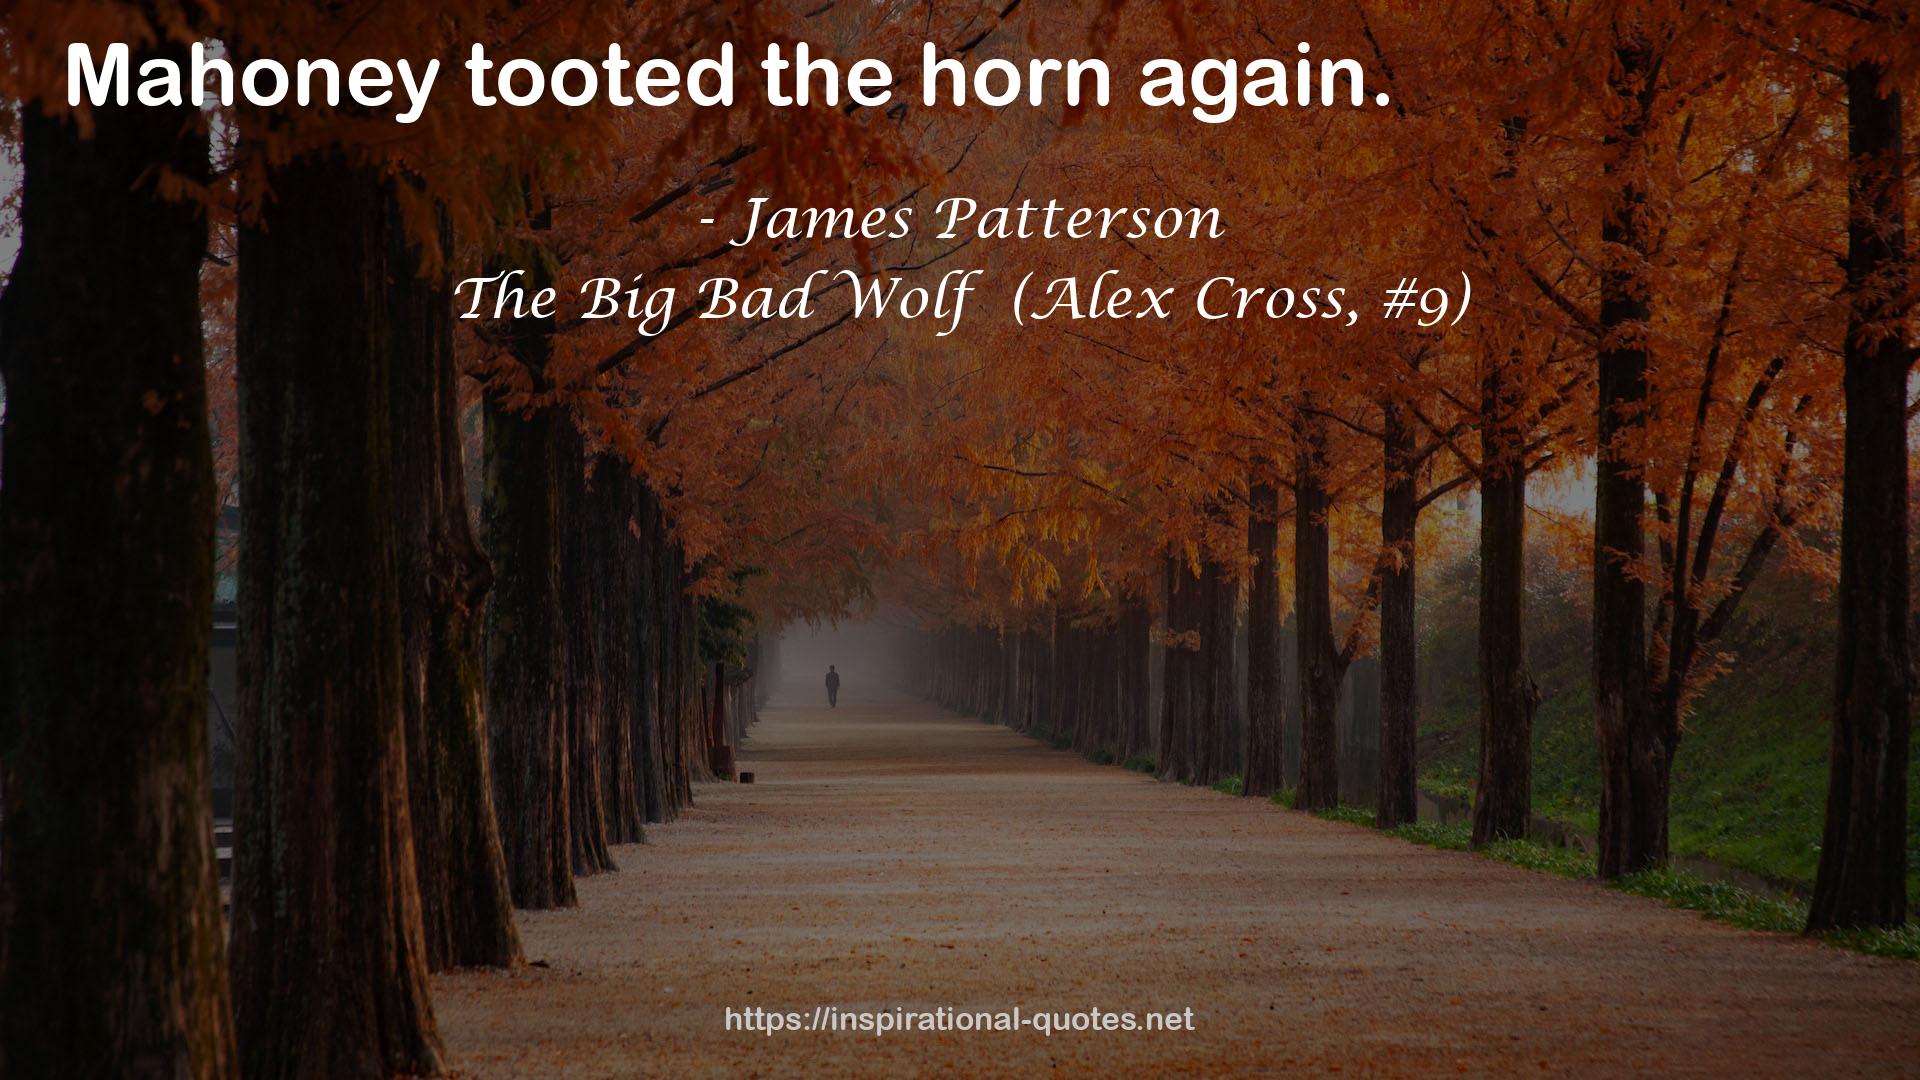 The Big Bad Wolf  (Alex Cross, #9) QUOTES